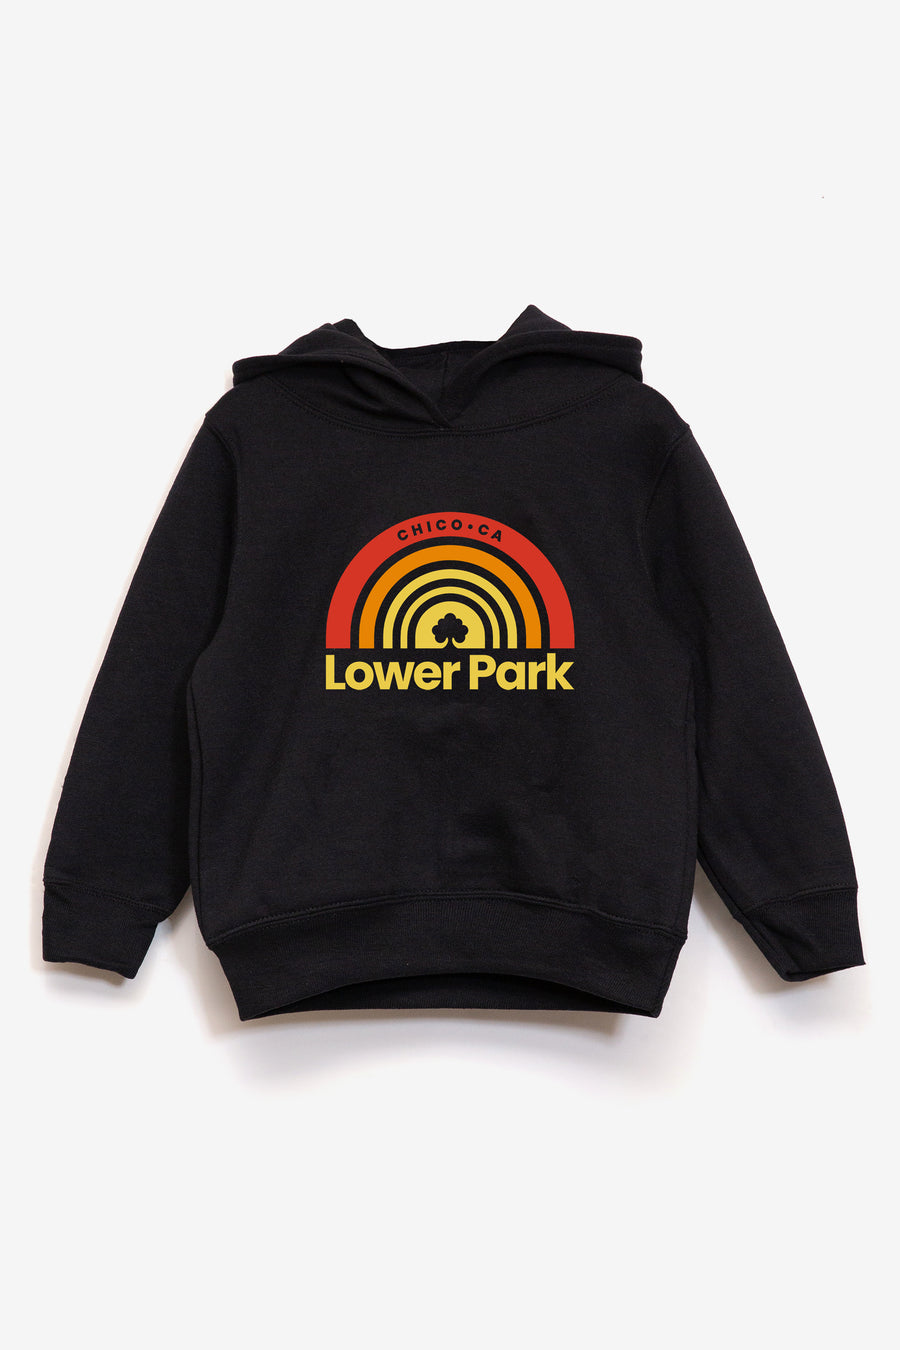 Lower Park Retro Toddler Pullover Hoodie